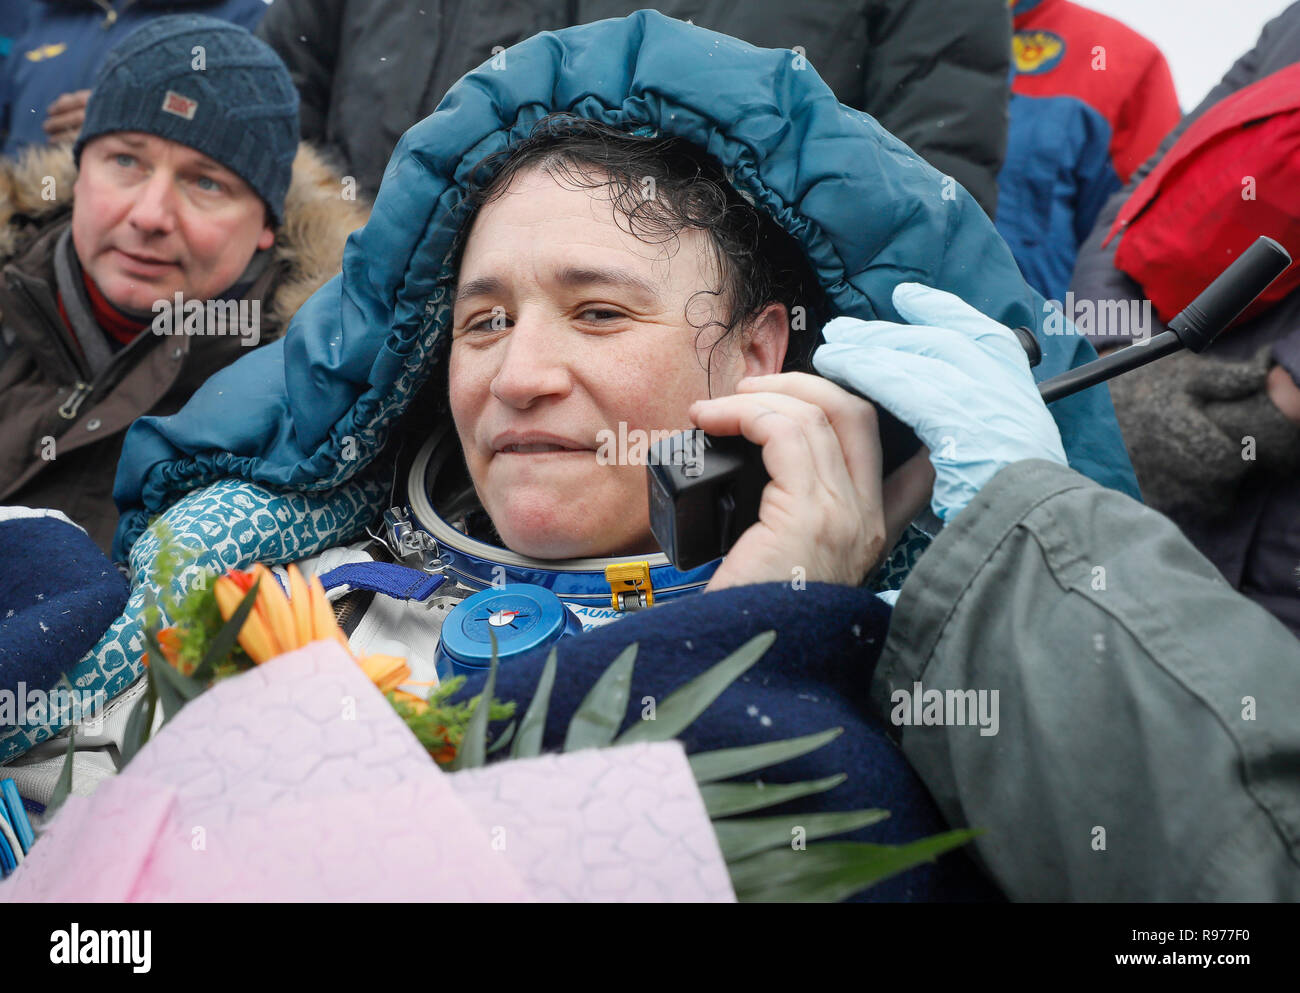 NASA's Serena Aunon-Chancellor speaks on a satellite phone after landing in a remote area outside the town of Zhezkazgan, formerly known as Dzhezkazgan, Kazakhstan, on Thursday, Dec. 20, 2018. Three astronauts have returned to Earth after more than six months aboard the International Space Station. (Shamil Zhumatov/Pool via AP) Stock Photo